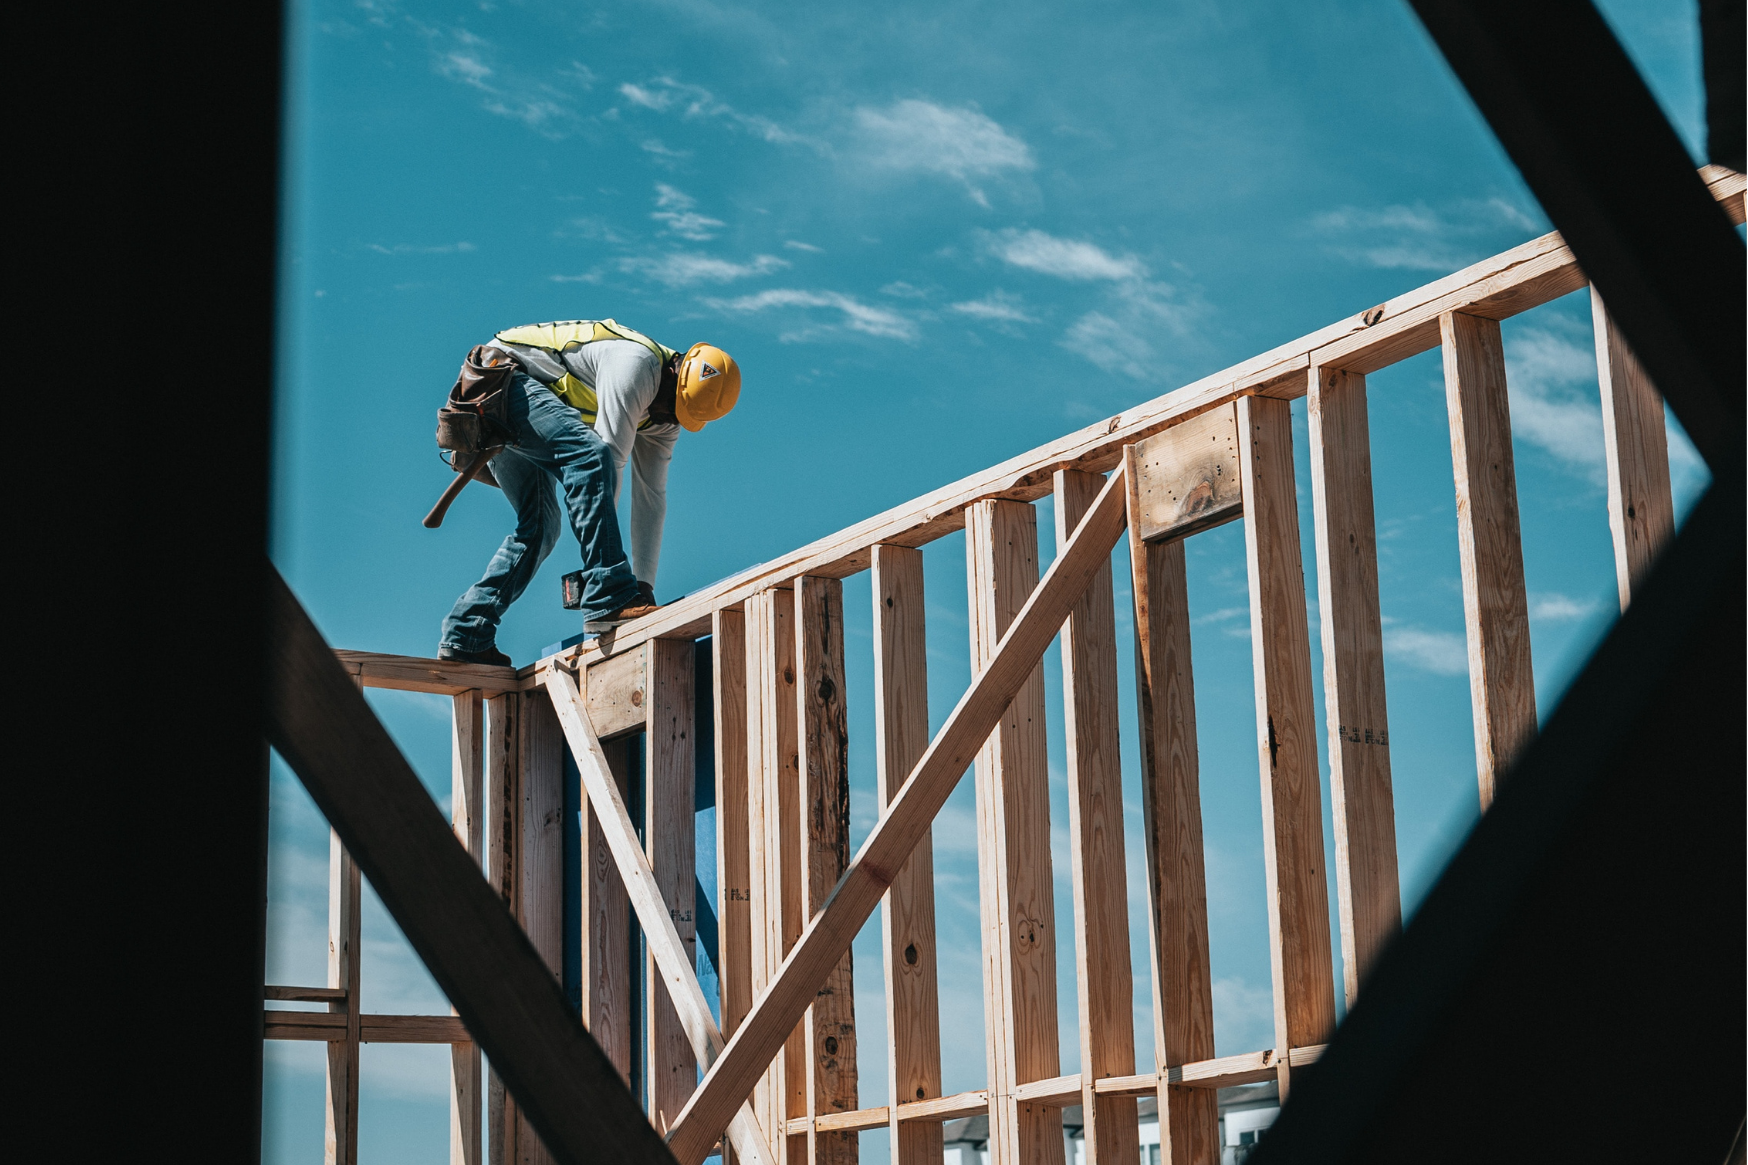 Construction worker standing on wooden framing outdoors with a blue sky background